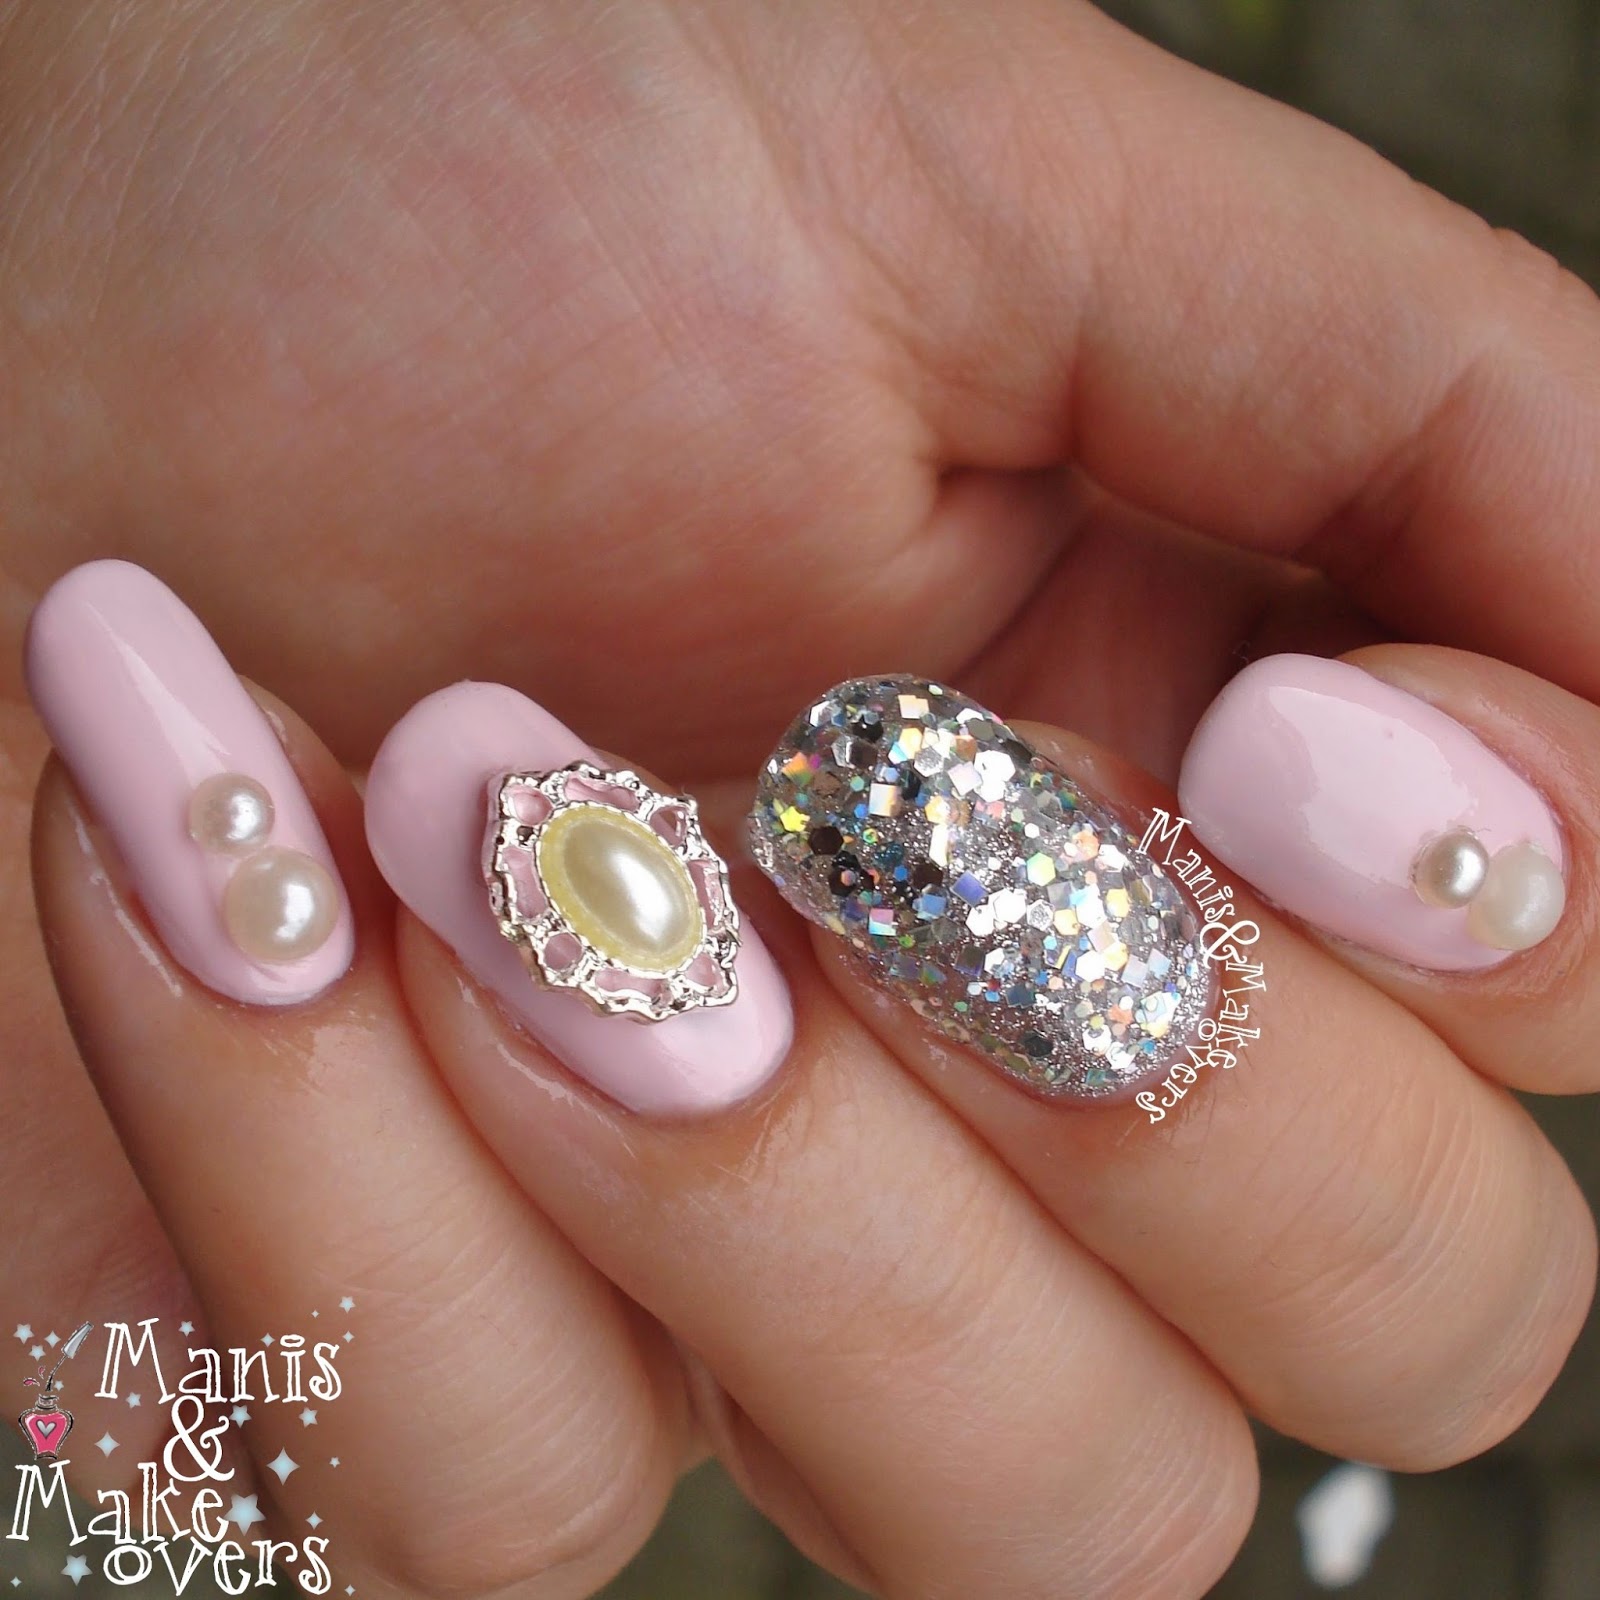 Manis & Makeovers: Born Pretty Store Review - Nail Art Charms